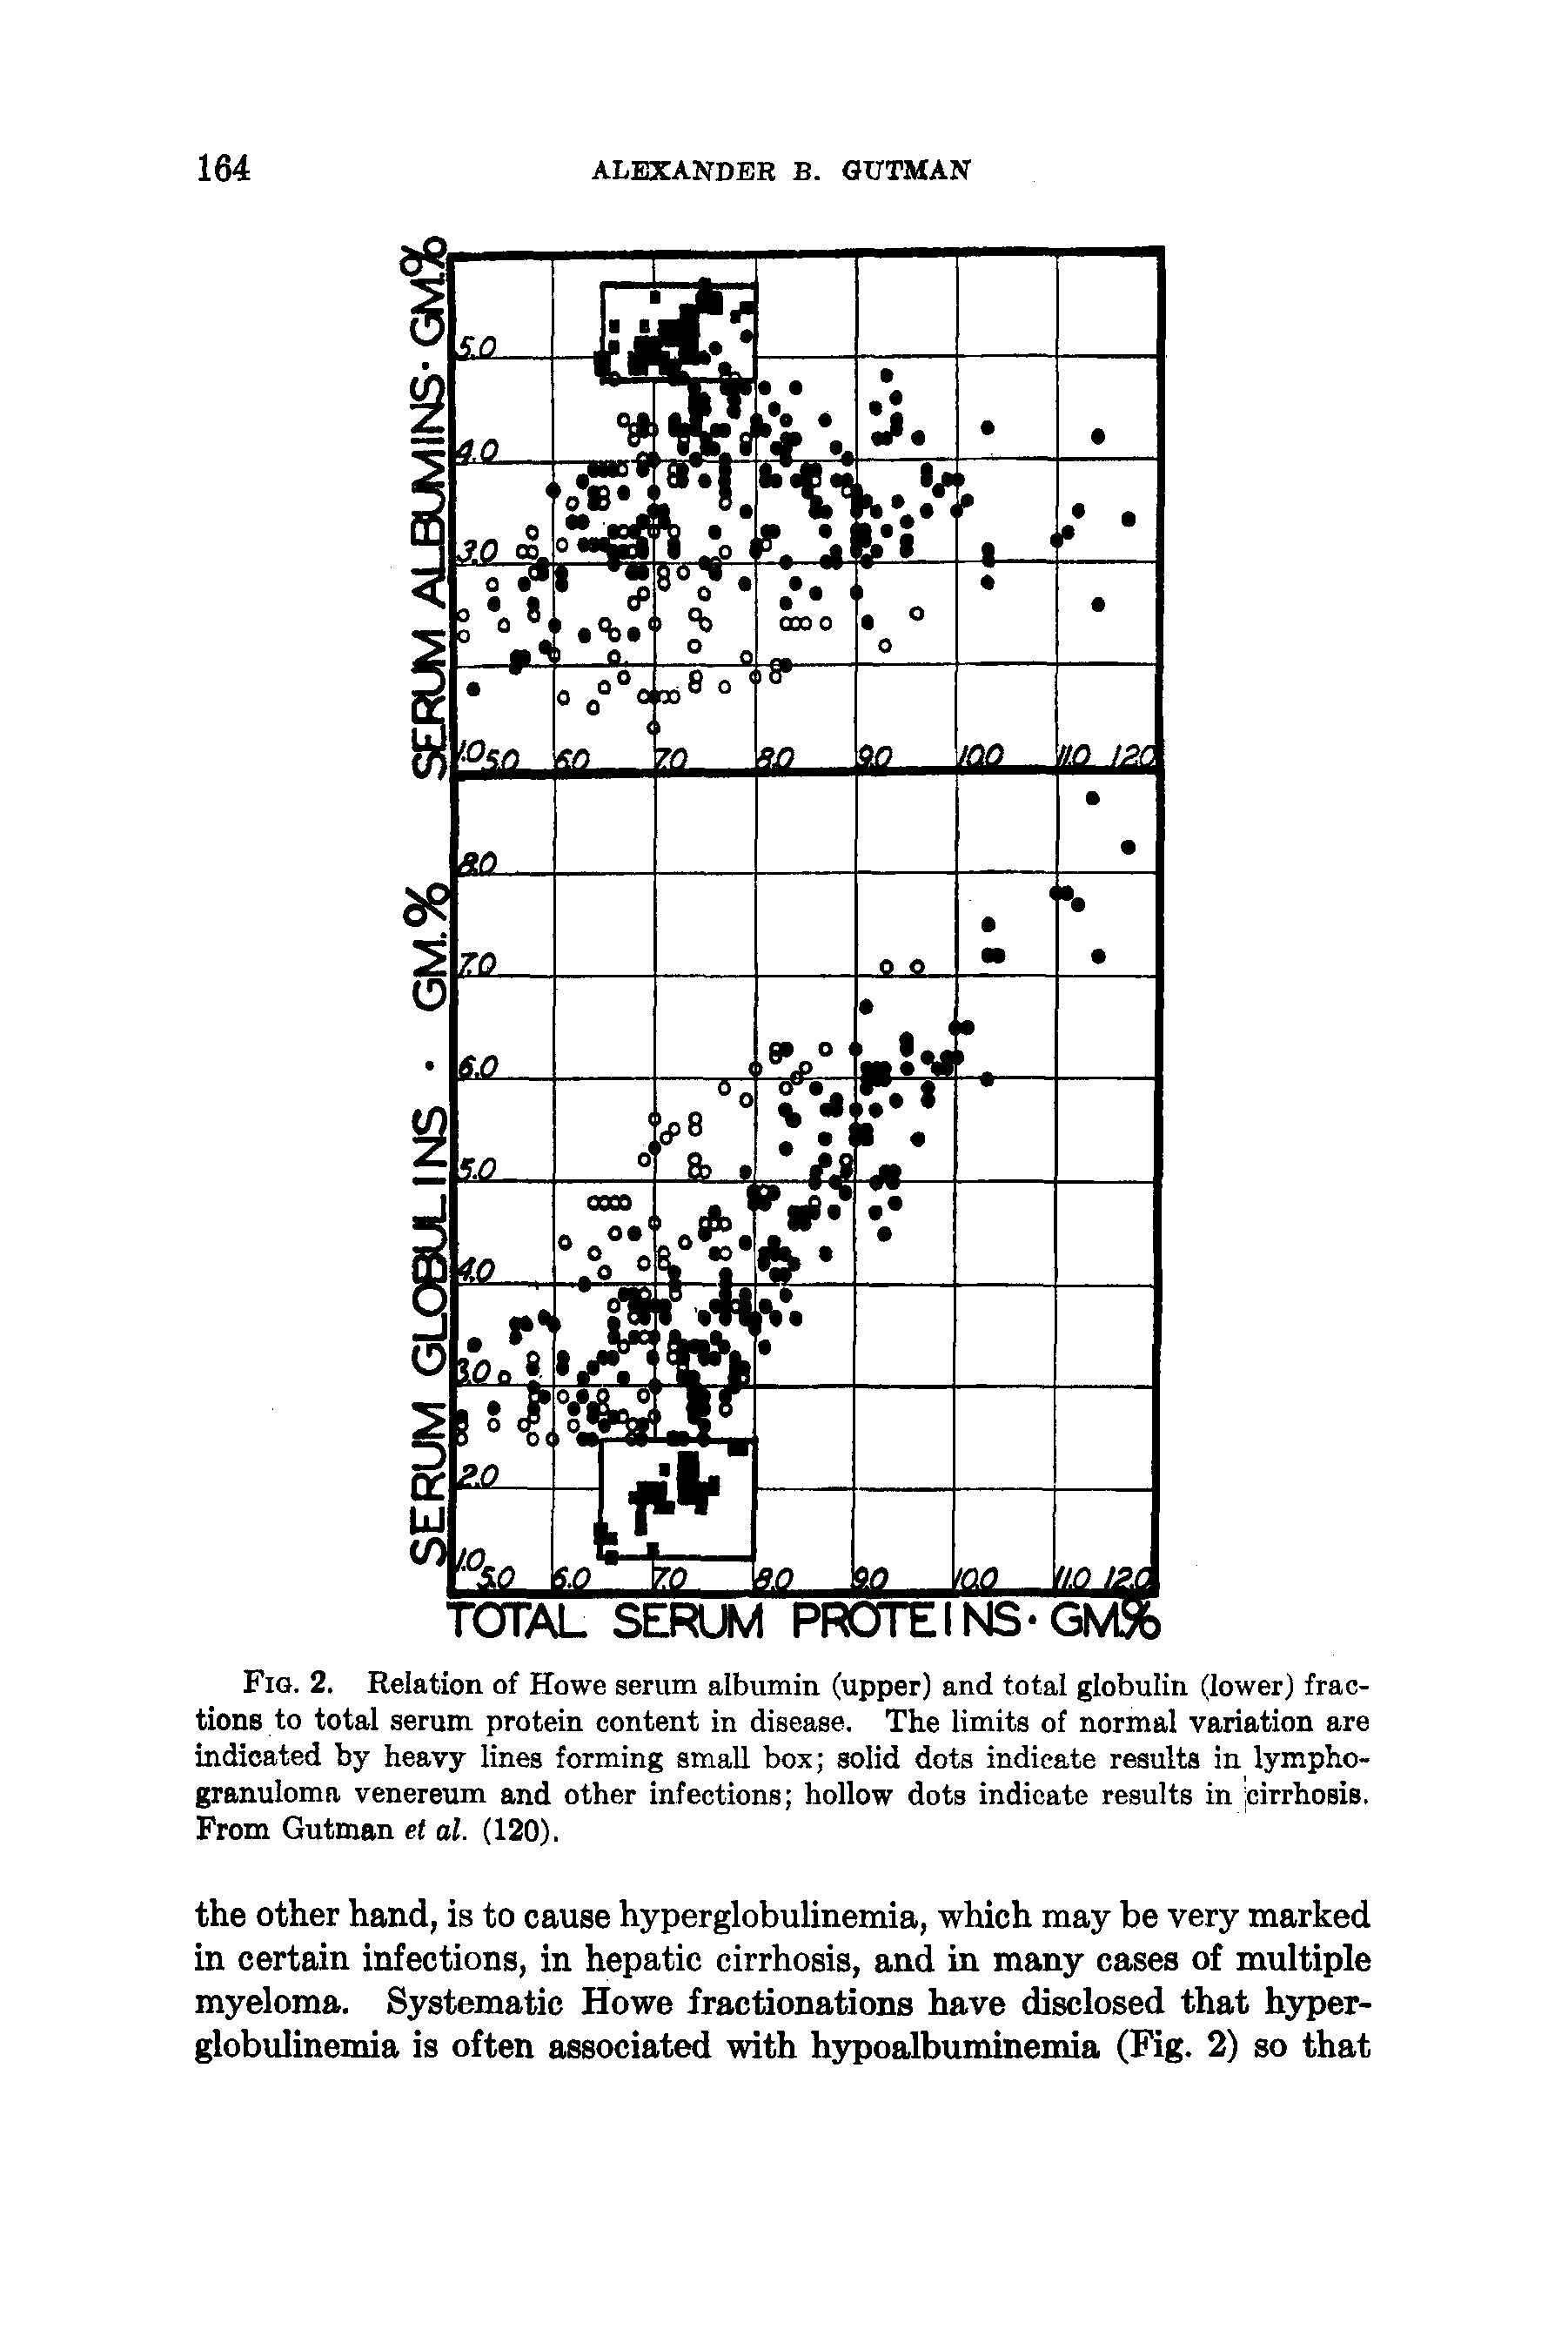 Fig. 2. Relation of Howe serum albumin (upper) and total globulin (lower) fractions to total serum protein content in disease. The limits of normal variation are indicated by heavy lines forming small box solid dots indicate r ulta in lymphogranuloma venereum and other infections hollow dots indicate results in icirrhosis. From Gutman et al. (120).